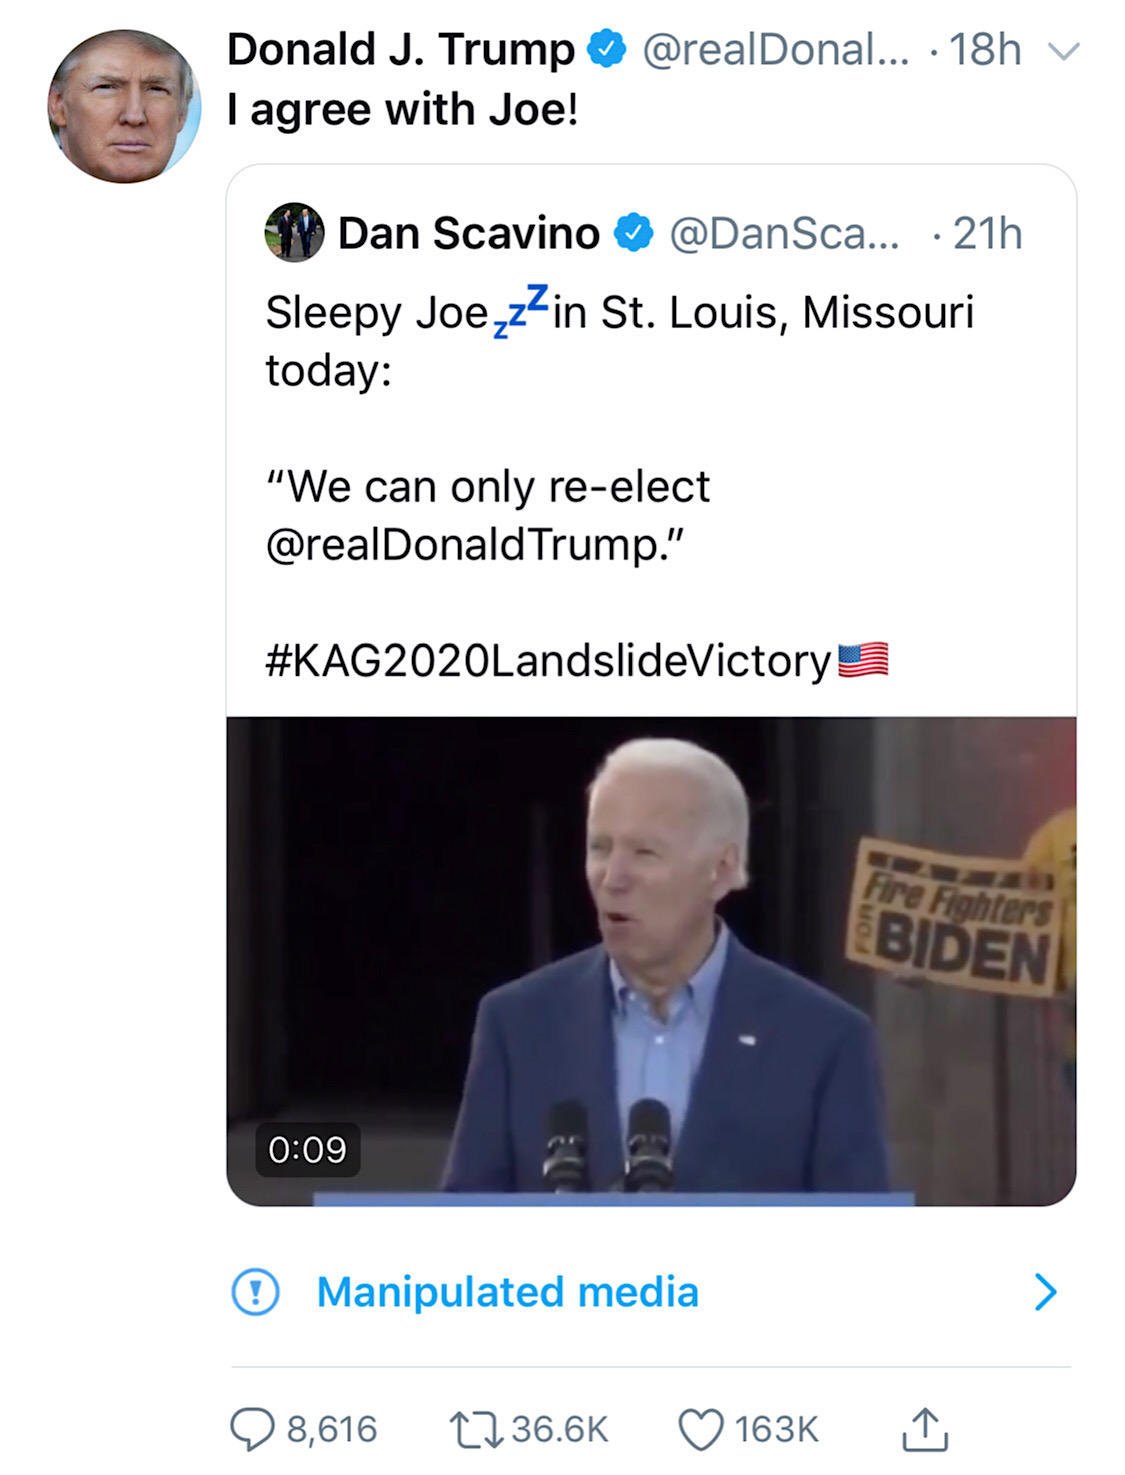 Twitter's “Manipulated media” label appeared for the first time on a video clip of 2020 presidential candidate Joe Biden that was shared by President Trump